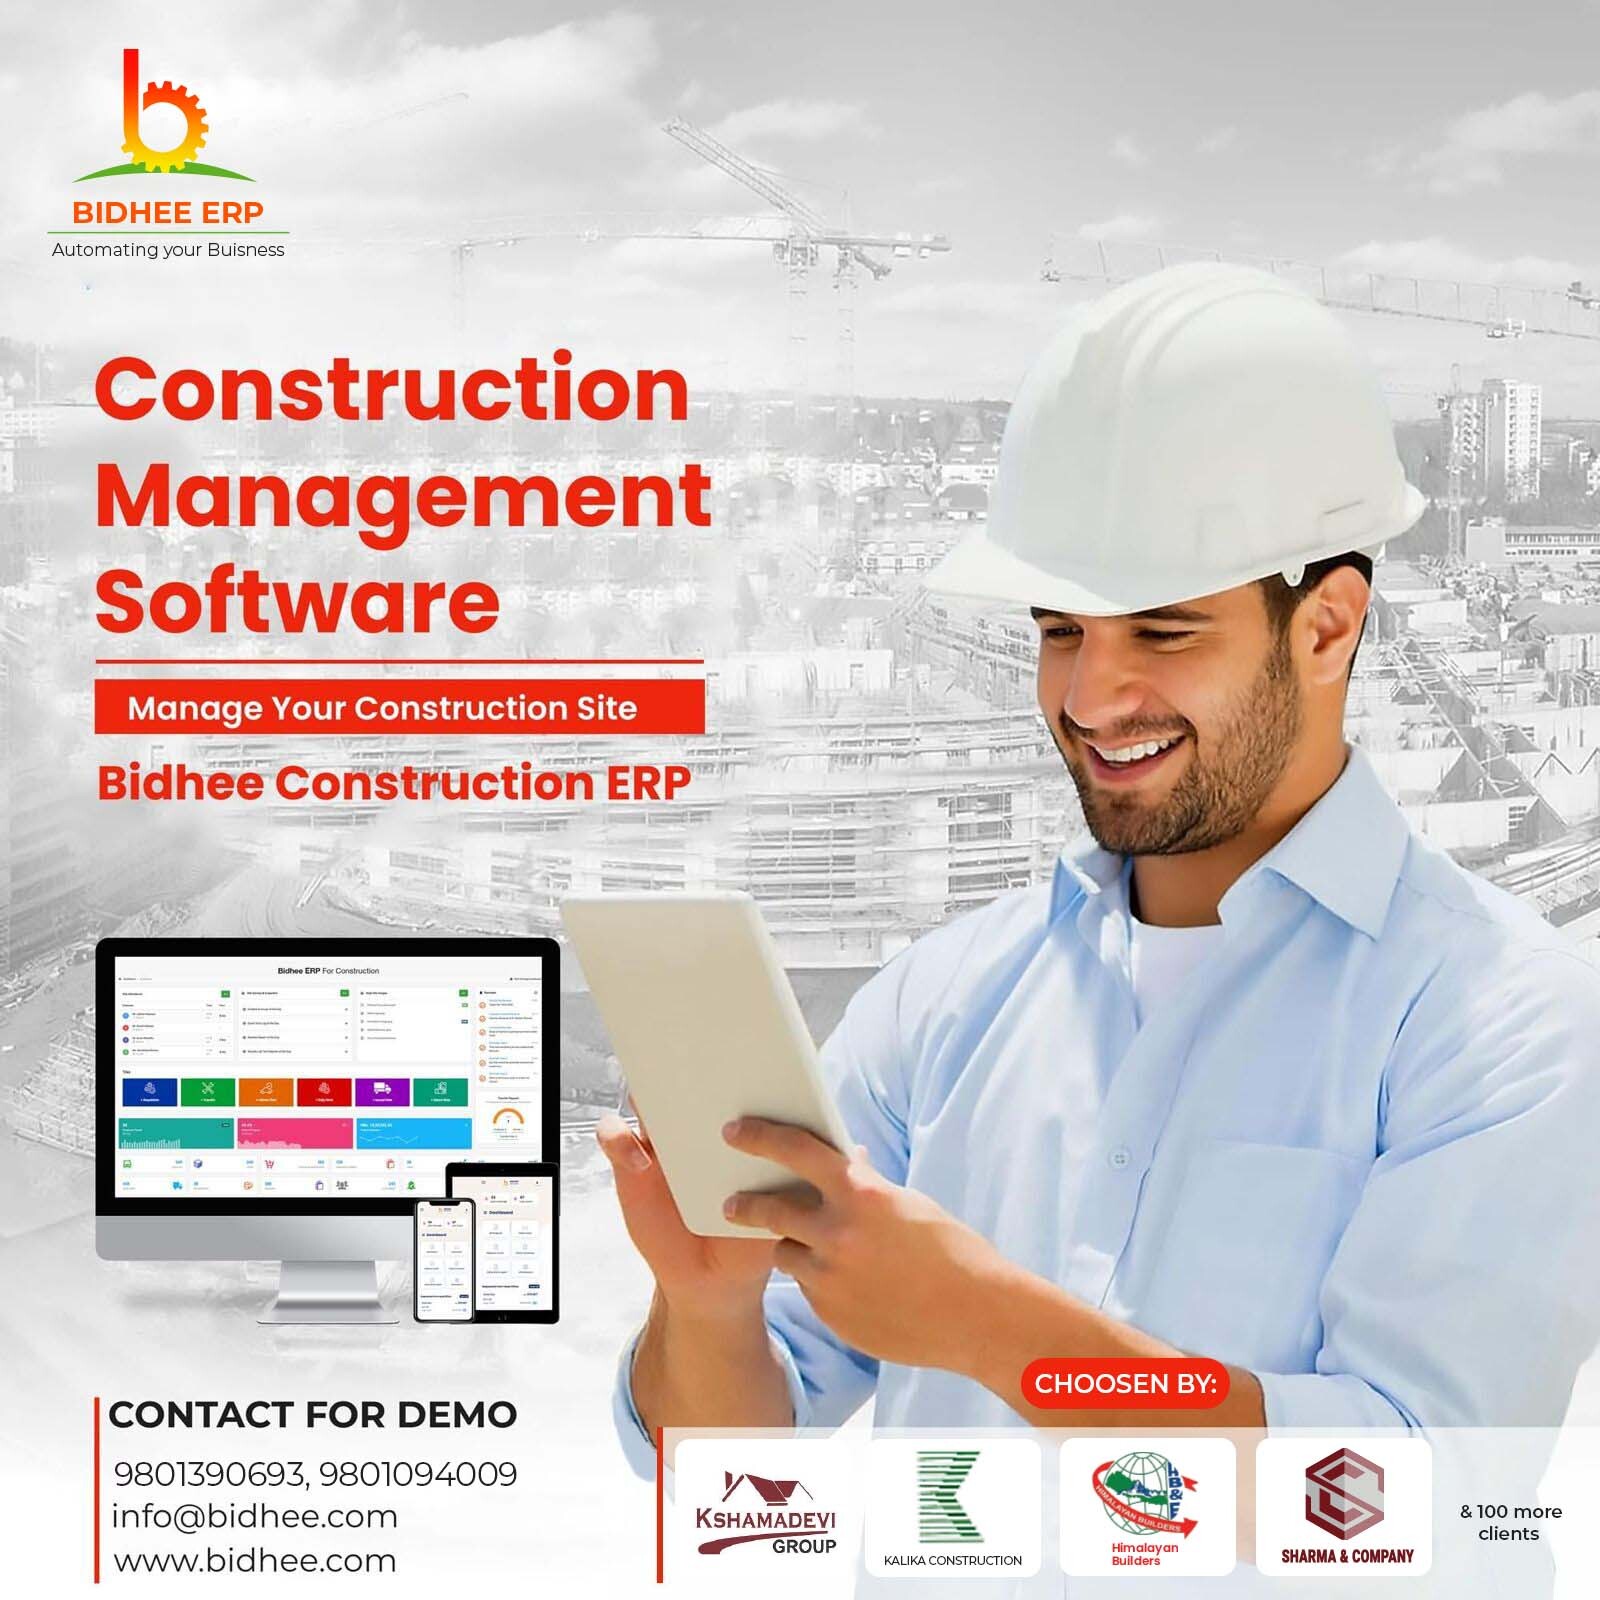 Transforming Construction Management with Bidhee ERP